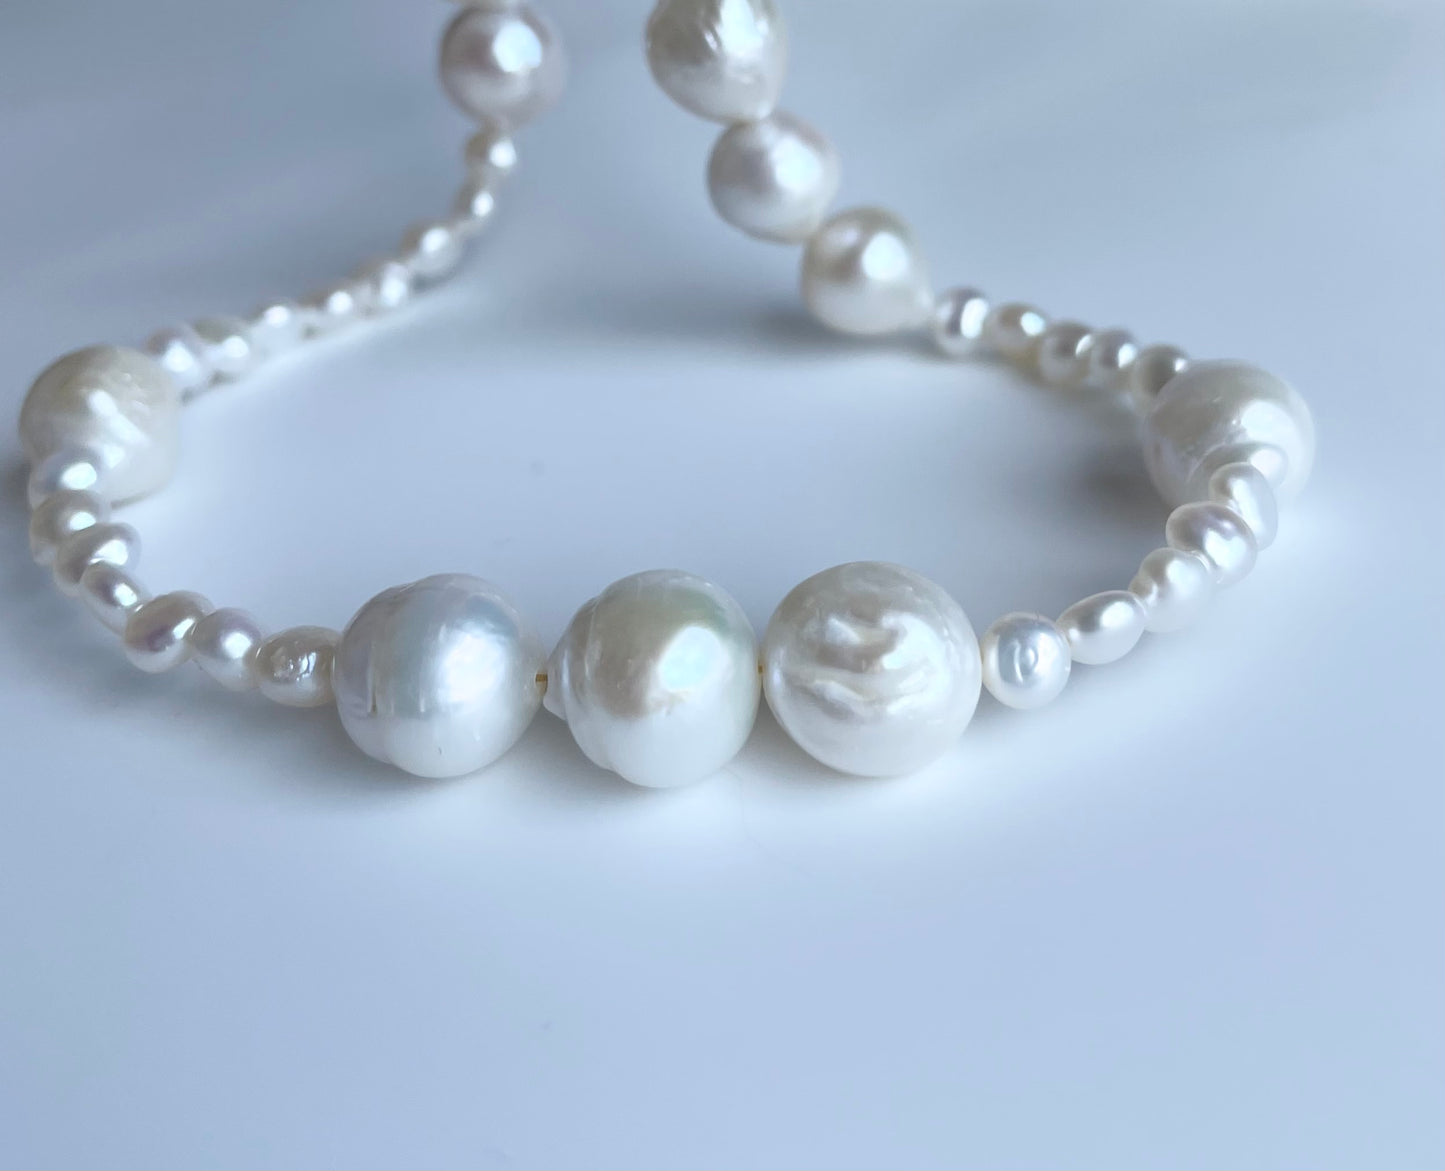 Baroque freshwater pearls pearl handcrafted handmade earring necklace bracelet for all girls boys women and men and unisex for vacation daily working summer autumn spring winter fashion jewelry accessories gift valentines christmas fashion summer winner festival pure purity natural planet in pearly and purely